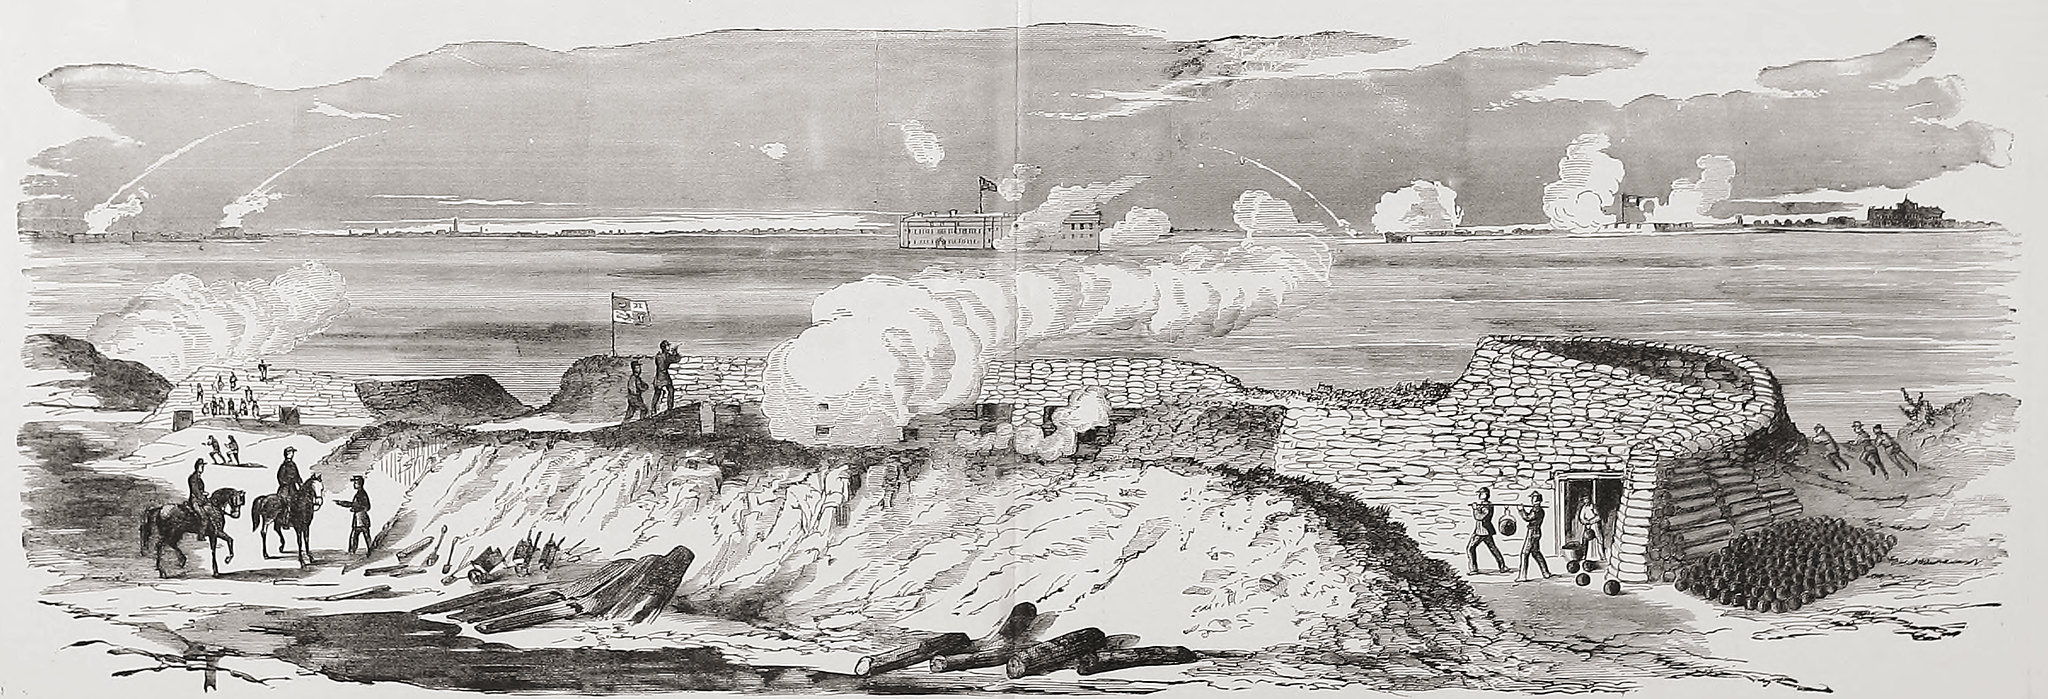 The Bombardment of Fort Sumter, Sketched from Morris Island, Charleston Harbor, S.C.